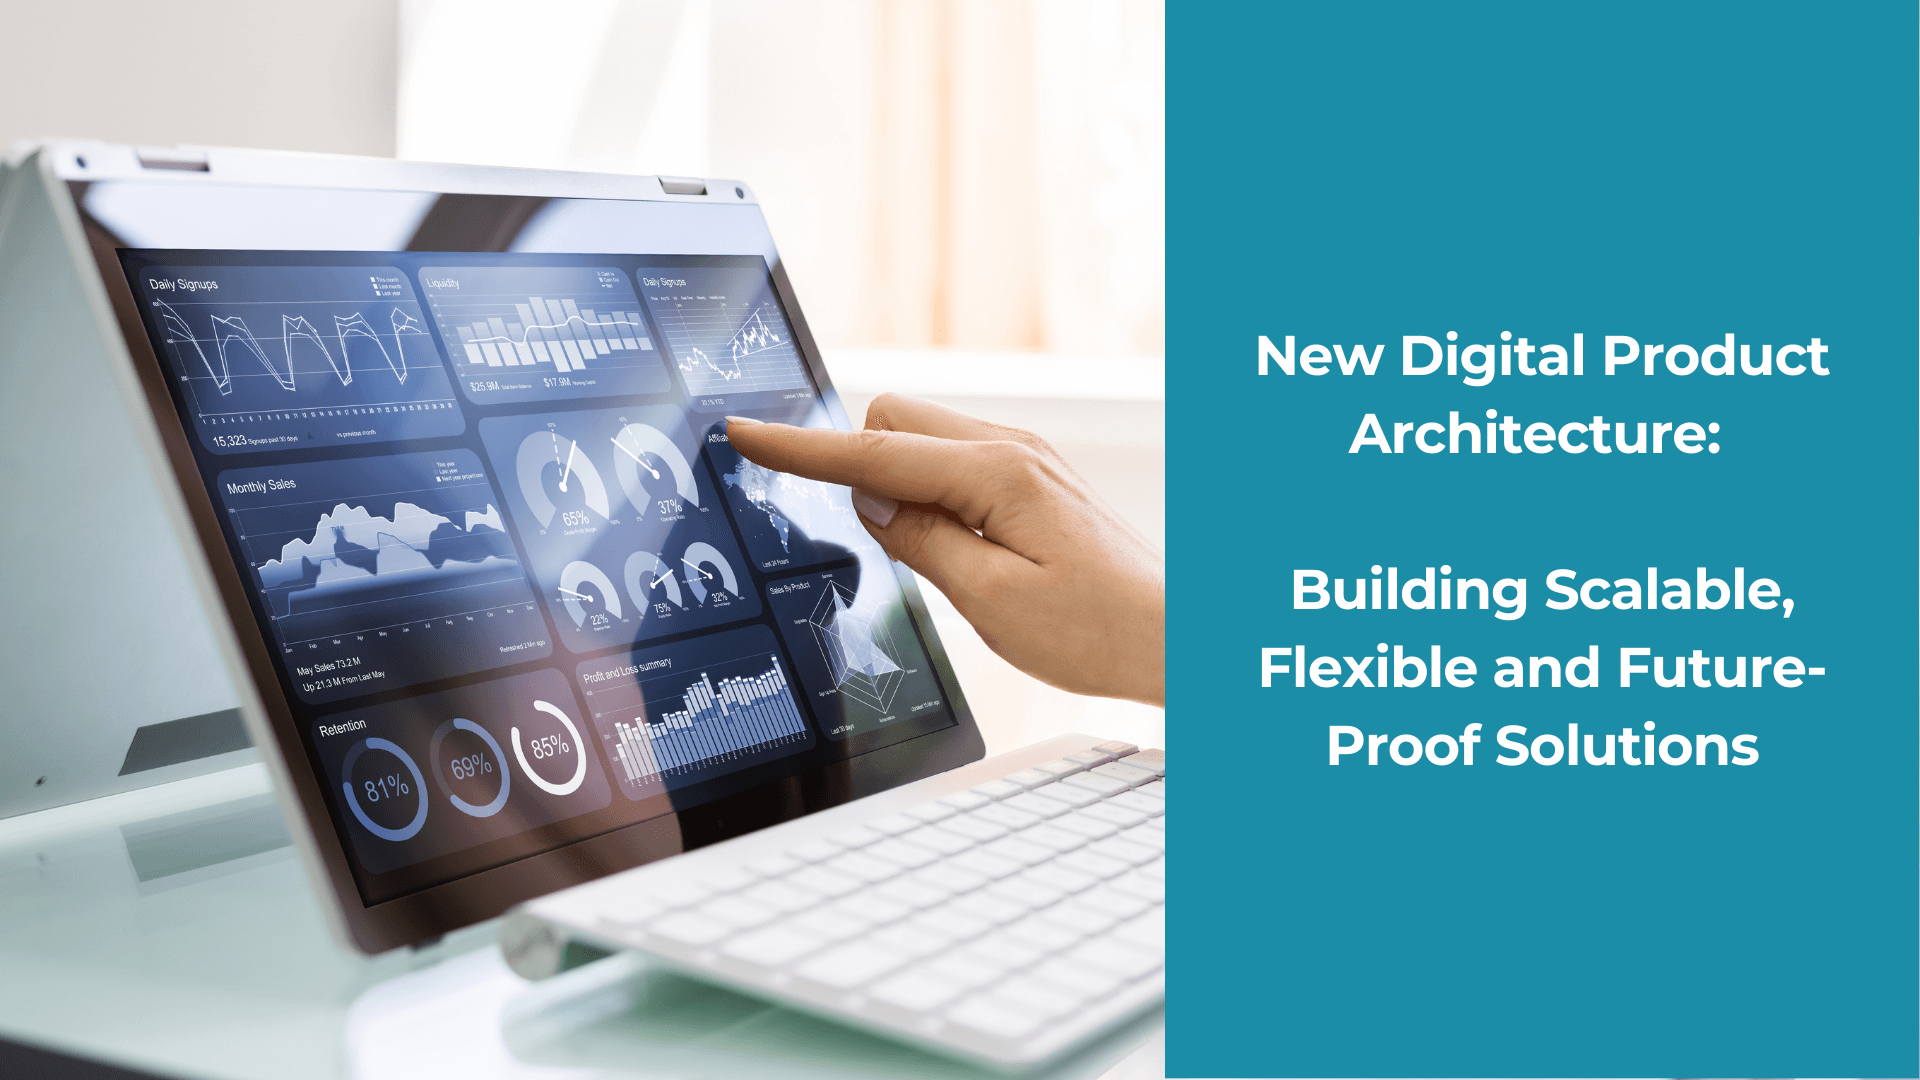 New Digital Product Architecture: Building Scalable, Flexible and Future-Proof Solutions